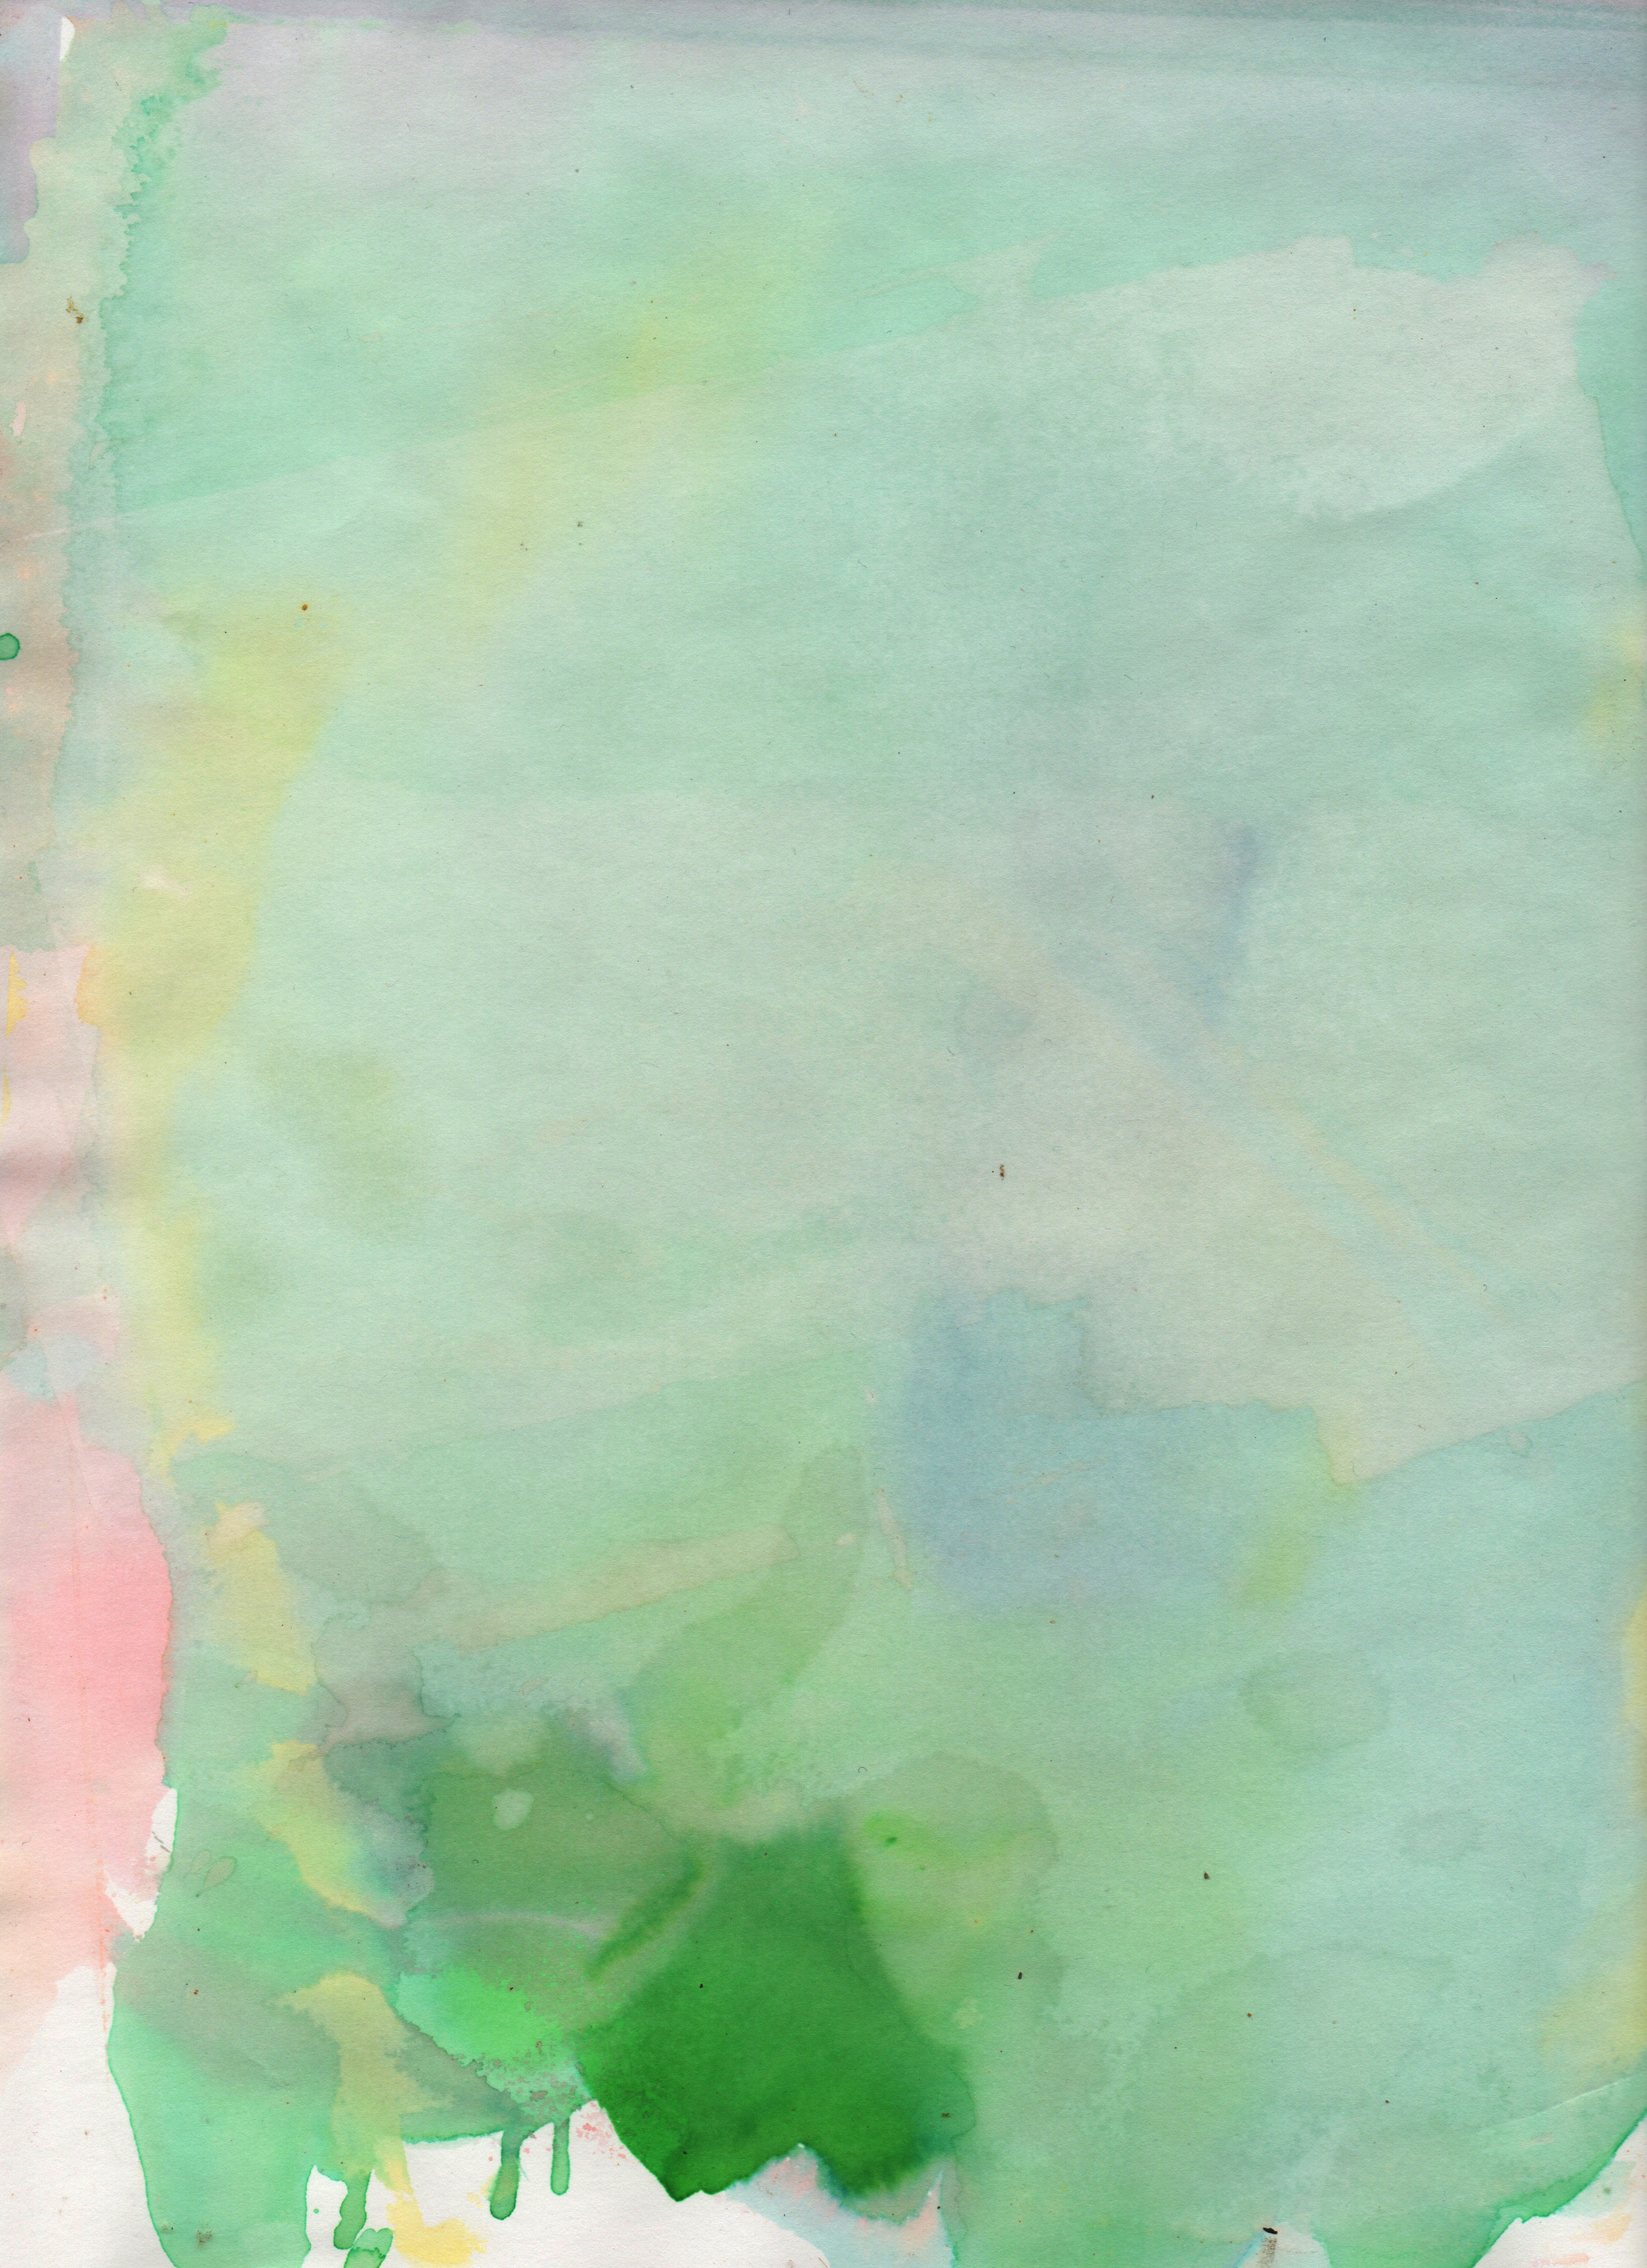 Green Stained Paper, Colored, Freetexturefrida, Green, Grunge, HQ Photo